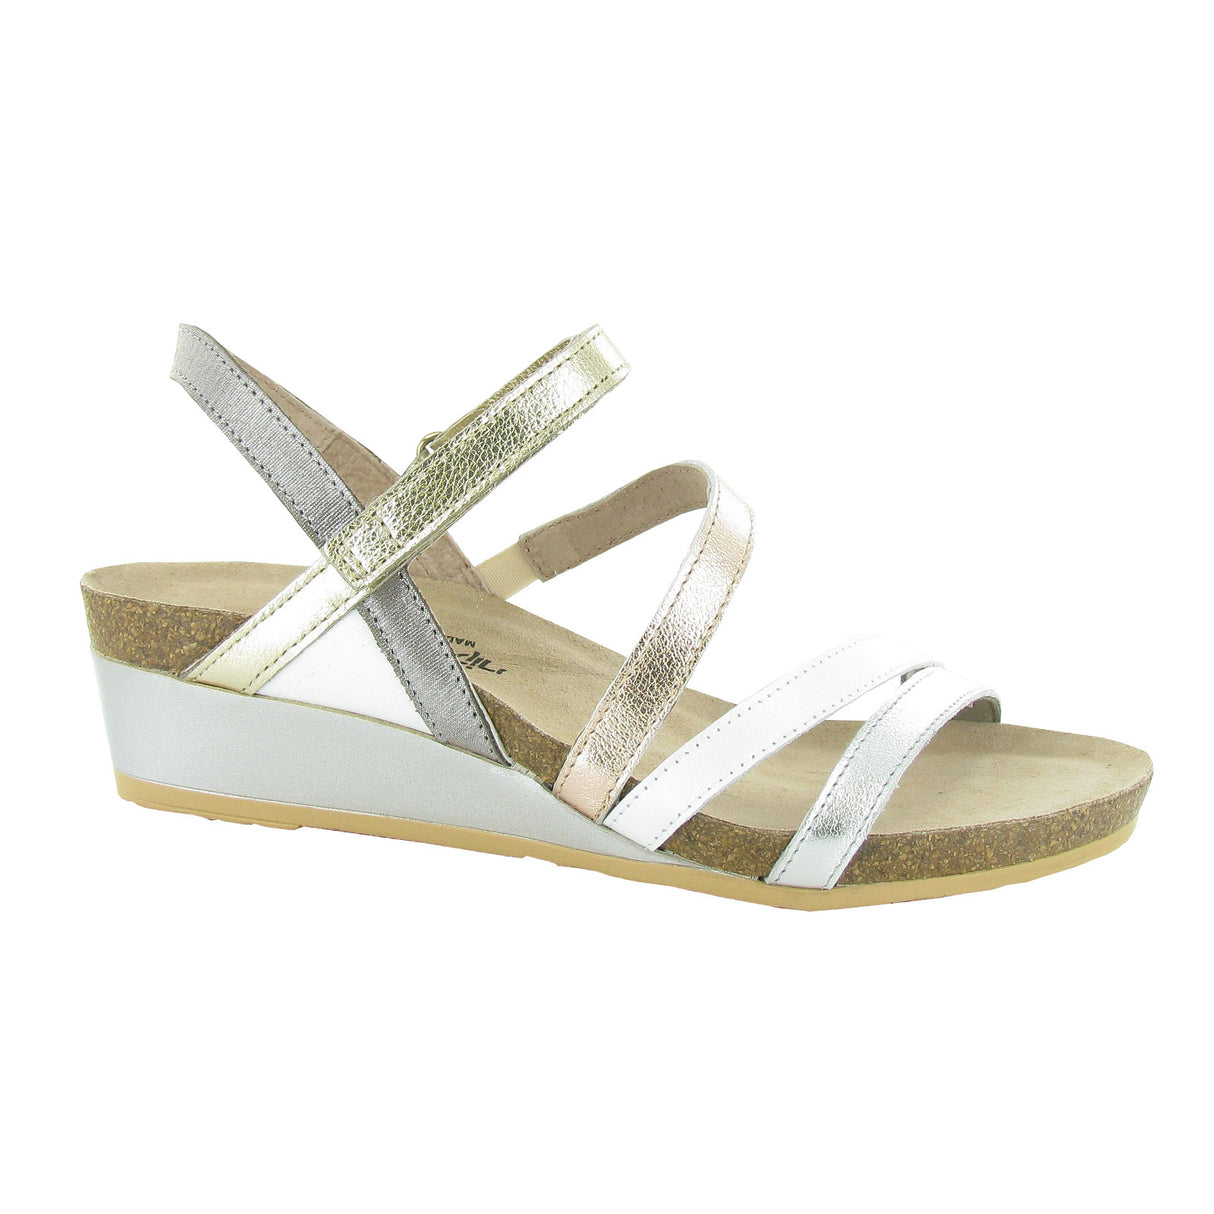 Naot Hero Wedge Sandal (Women) - Silver/Pearl White/Rose Gold/Radiant Gold Sandals - Heel/Wedge - The Heel Shoe Fitters